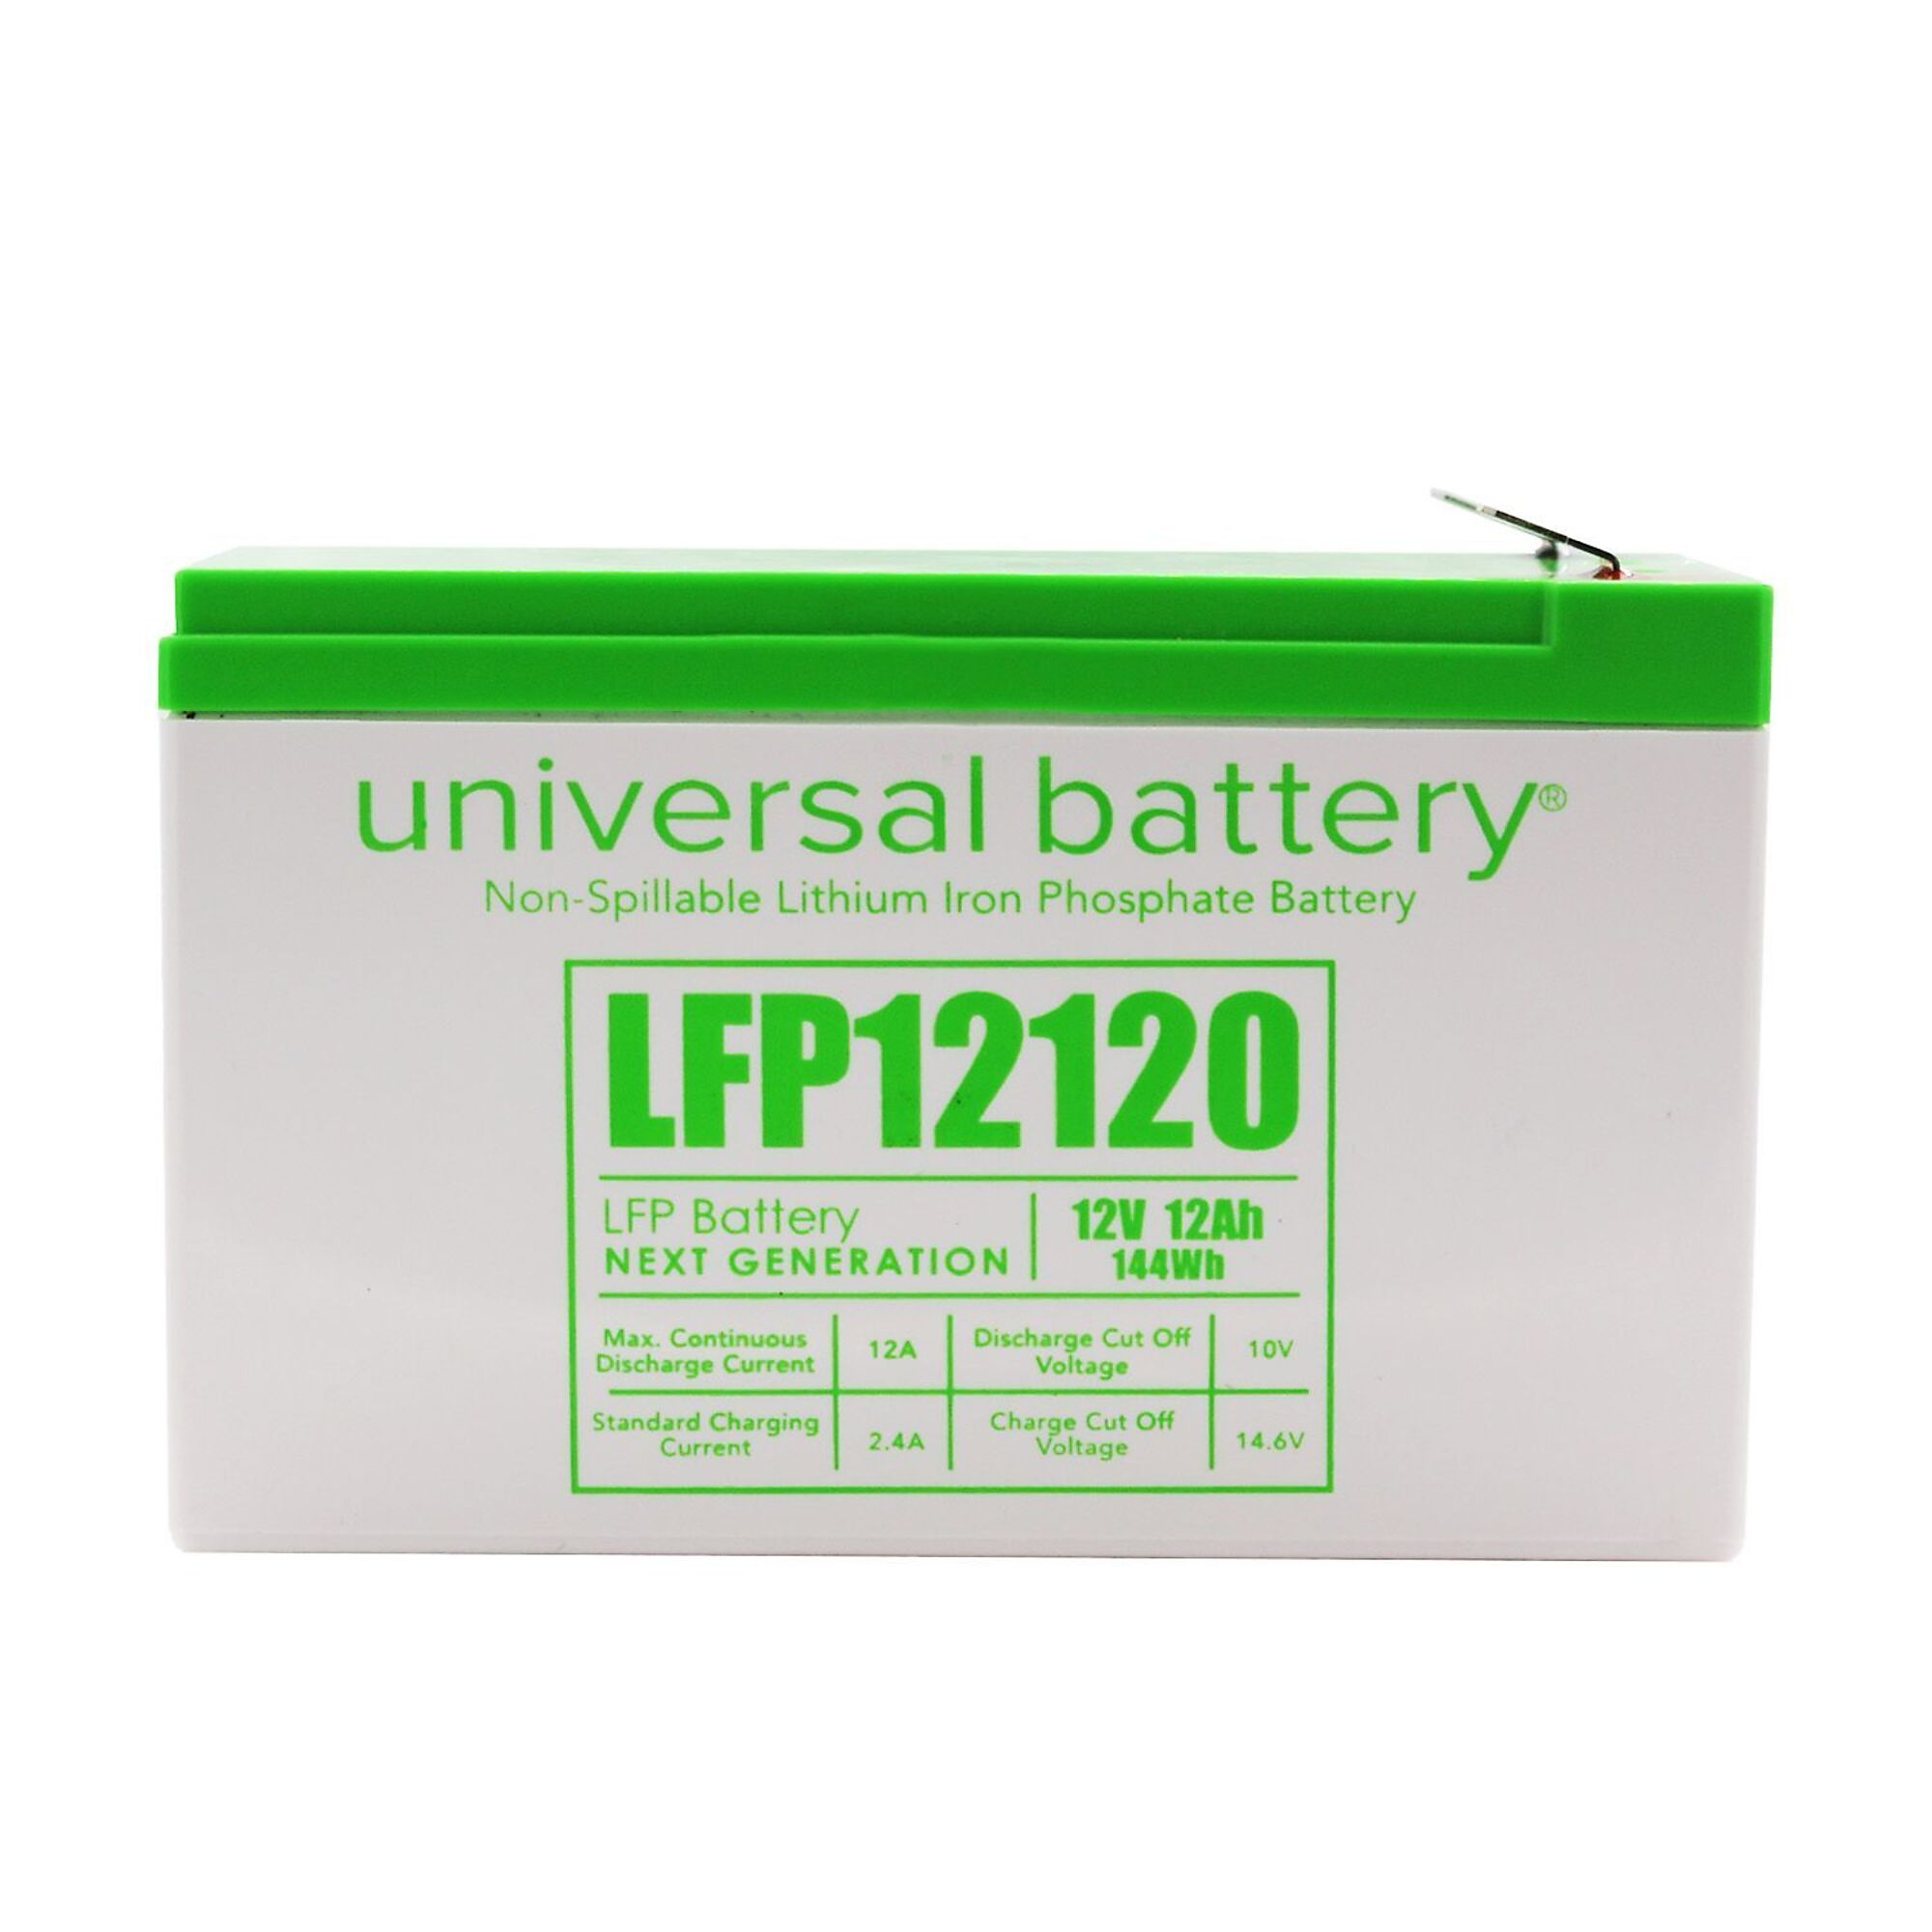 UPG, 12.8V 12Ah in 9Ah Case F2 LFP Battery, Volts 12 Amp Hours 12 Battery Power Type Lithium, Model 48042